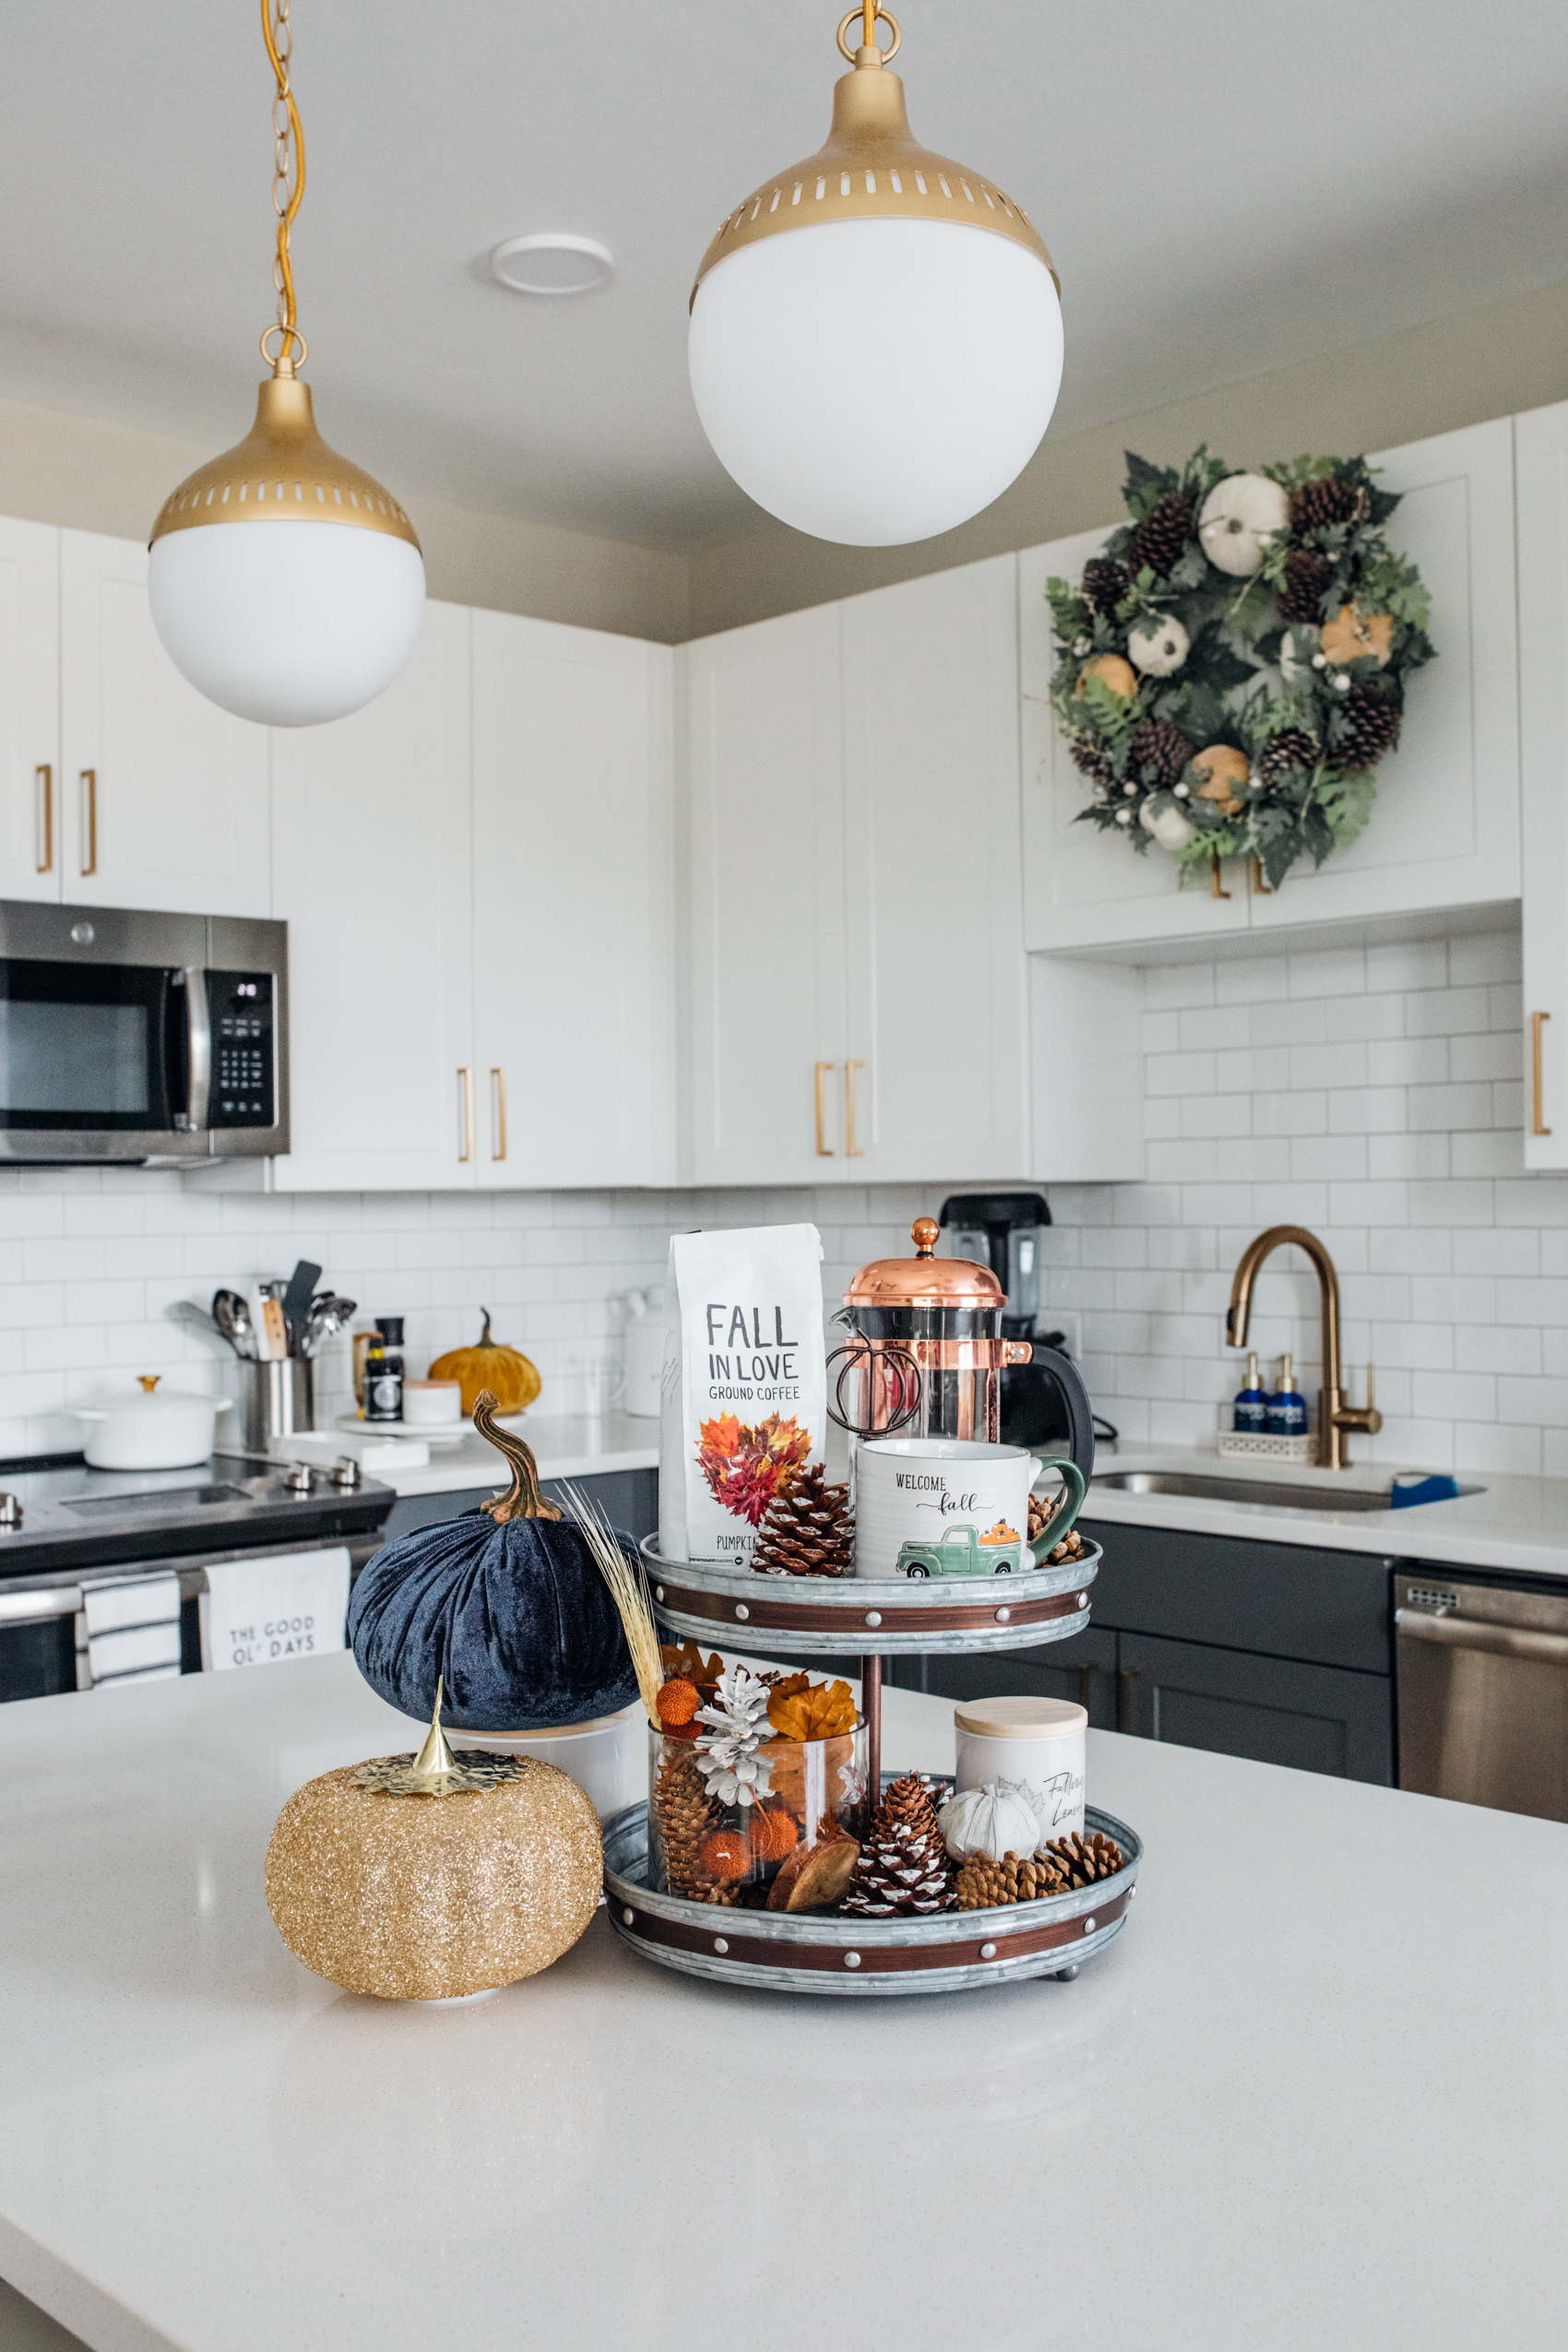 Fall kitchen decor in Dallas apartment with velvet pumpkins, pinecones and wreaths